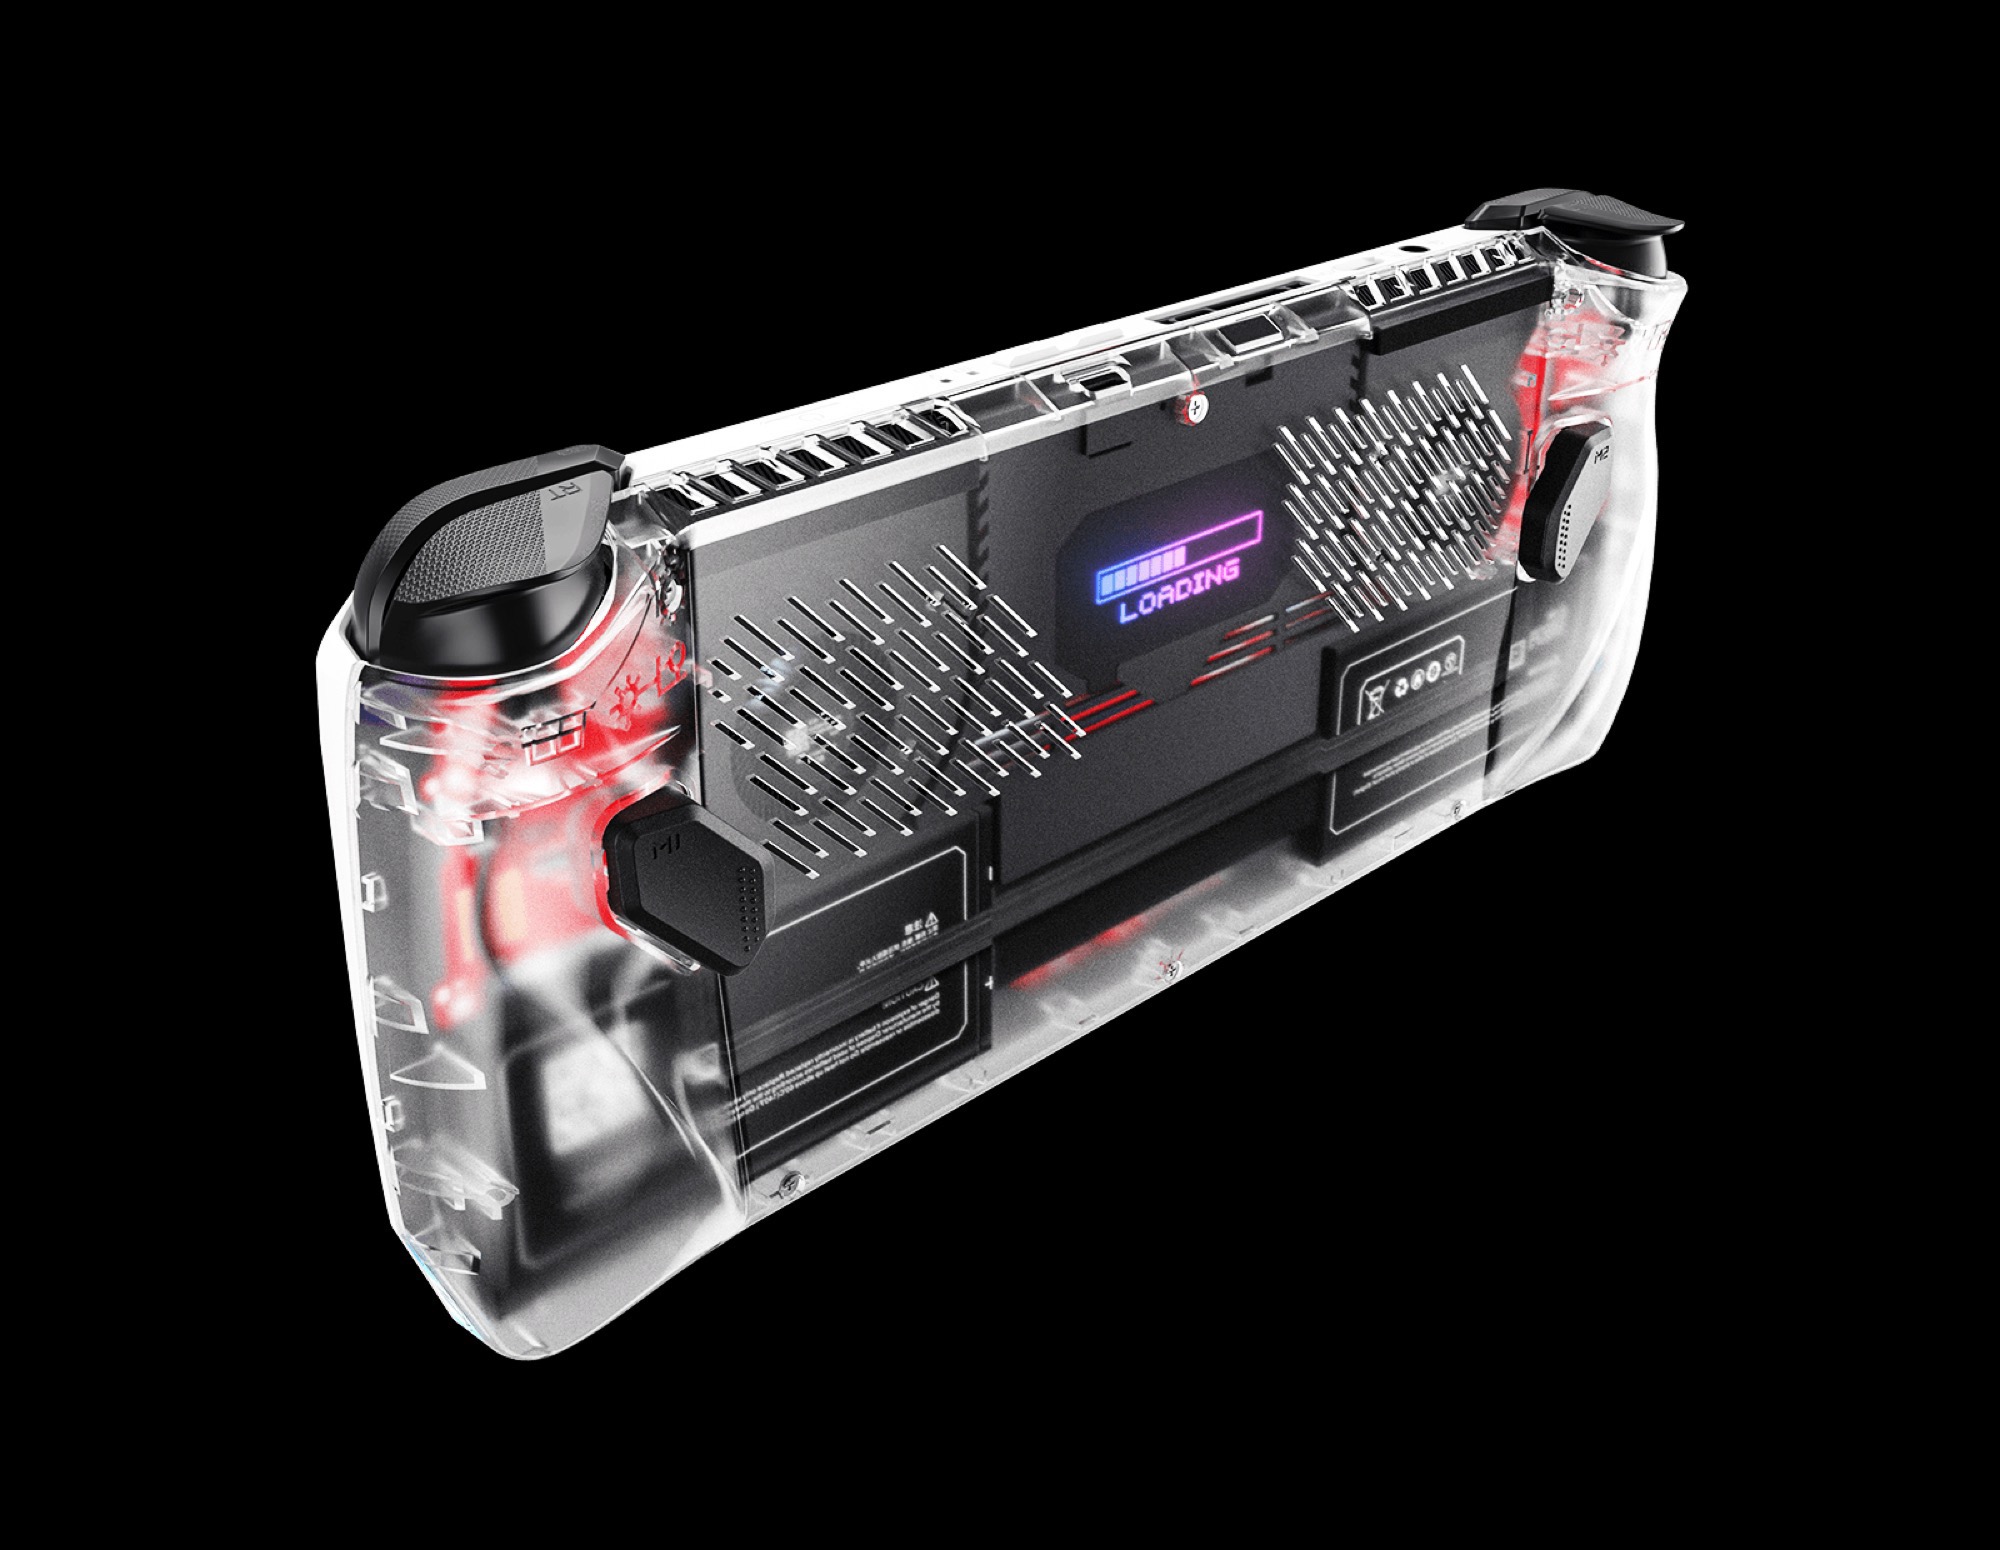 The latest JSAUX ROG Ally accessories are an awesome case and a transparent  backplate